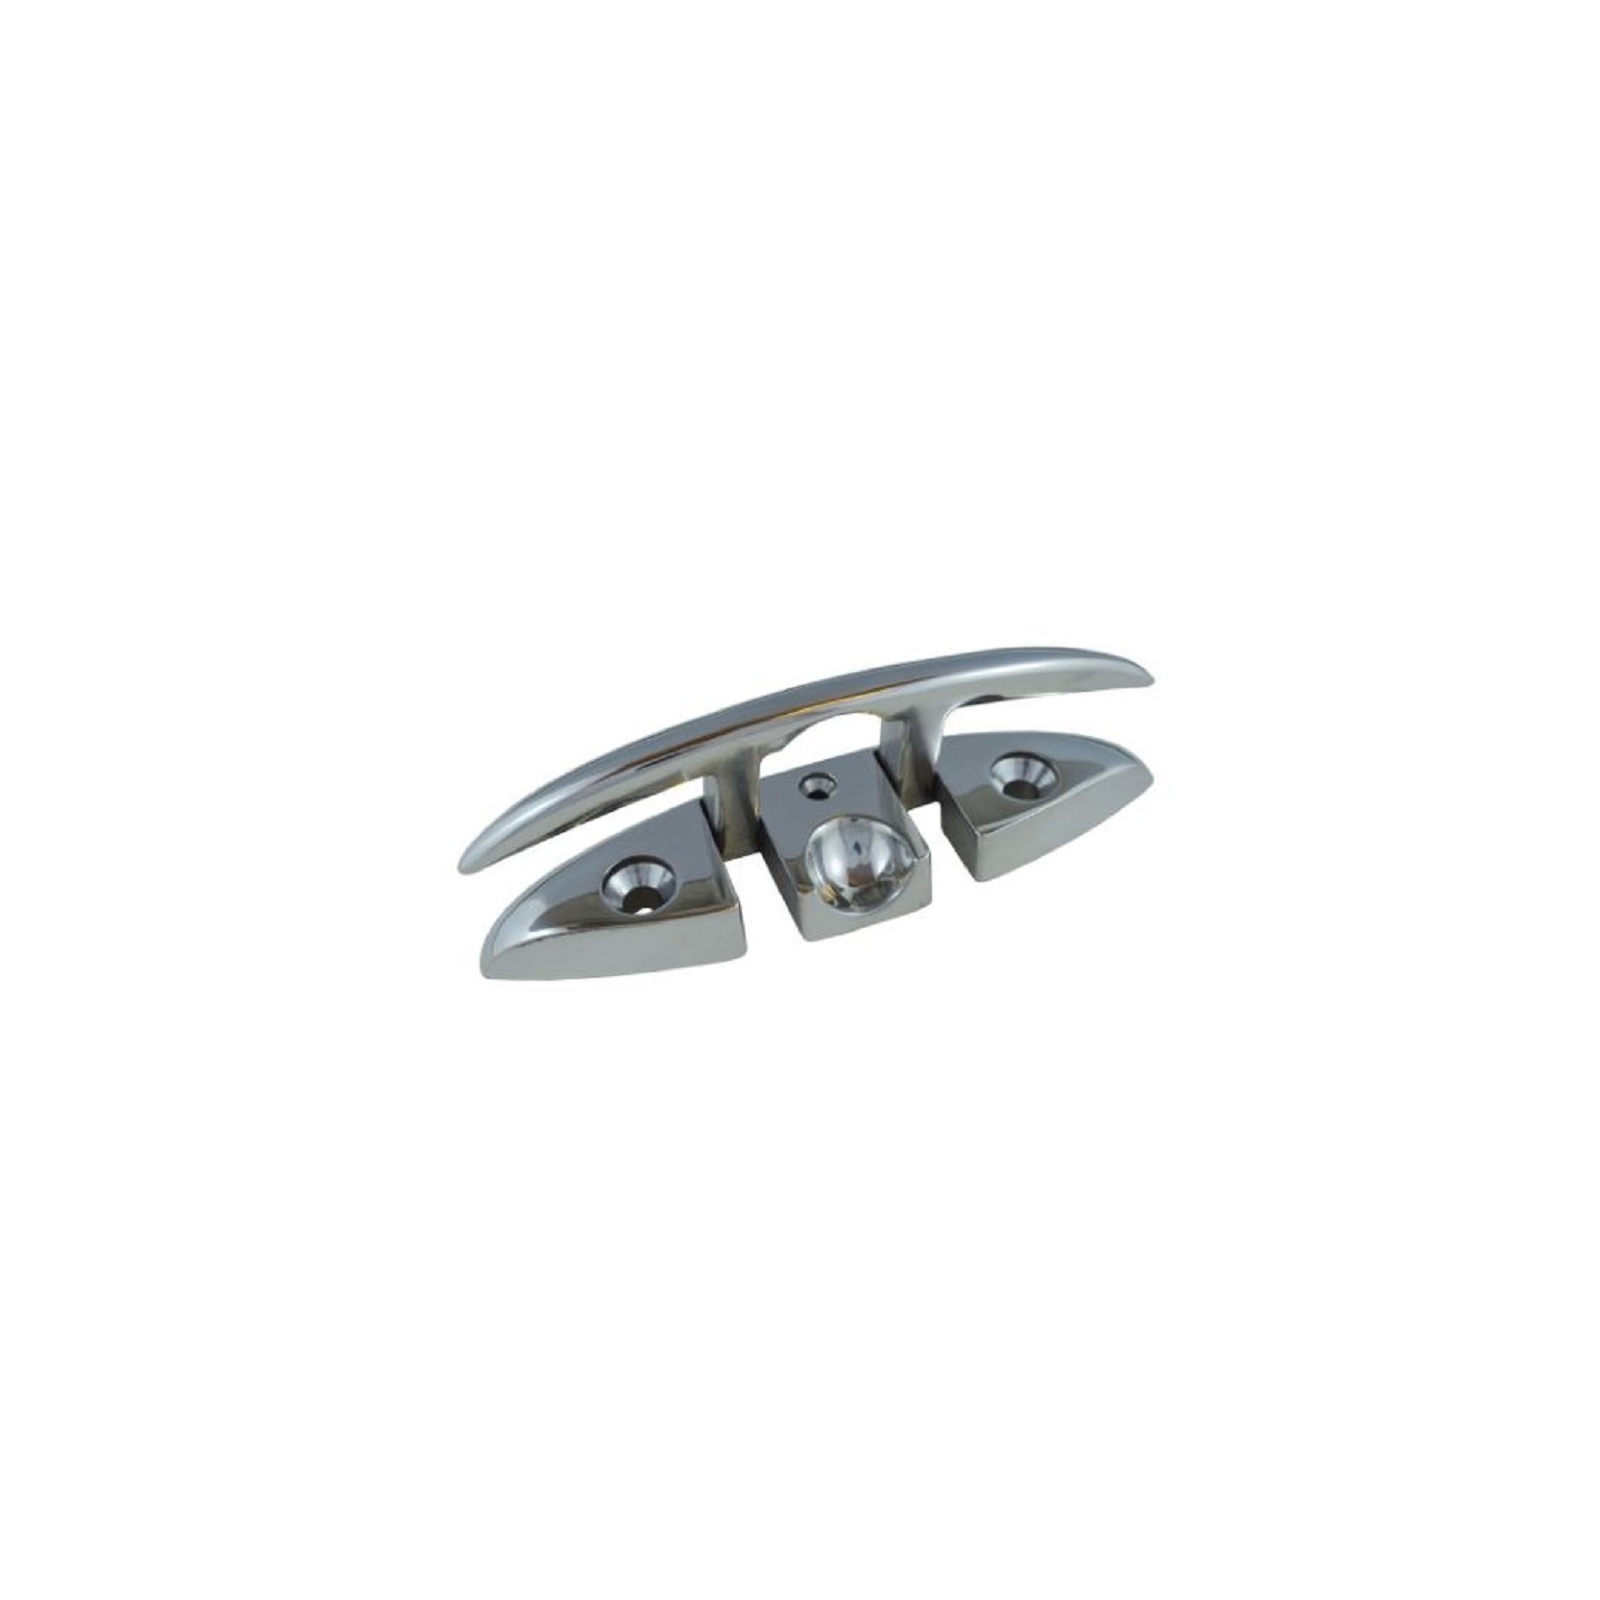 Boat Cleat - Folding 155mm Stainless Steel